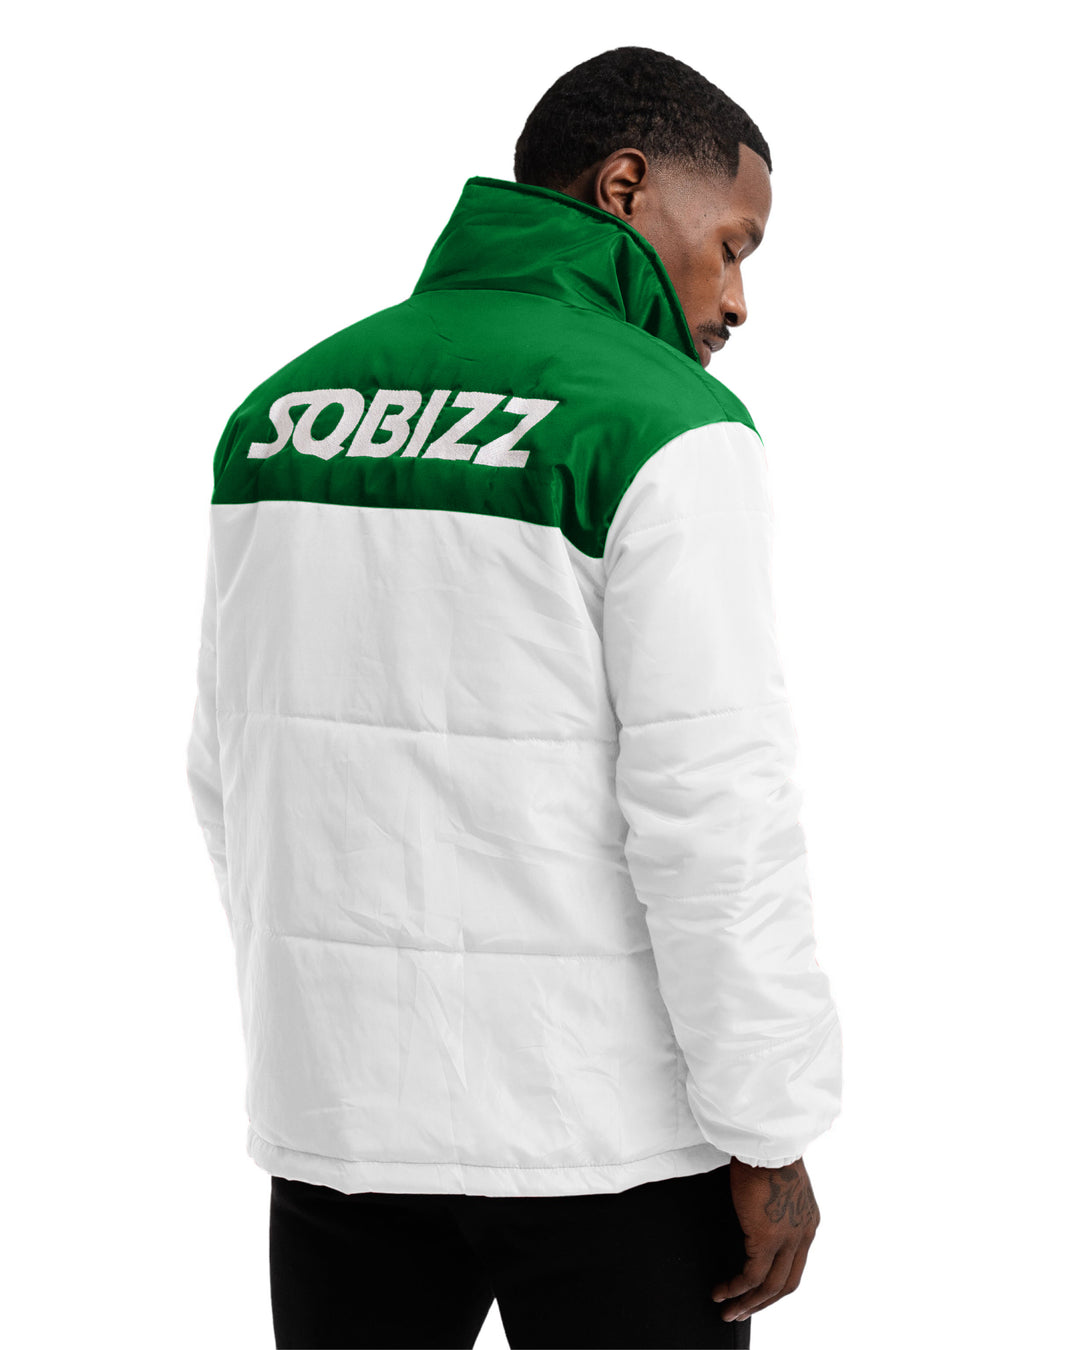 Club Puffer Jacket In White/Green